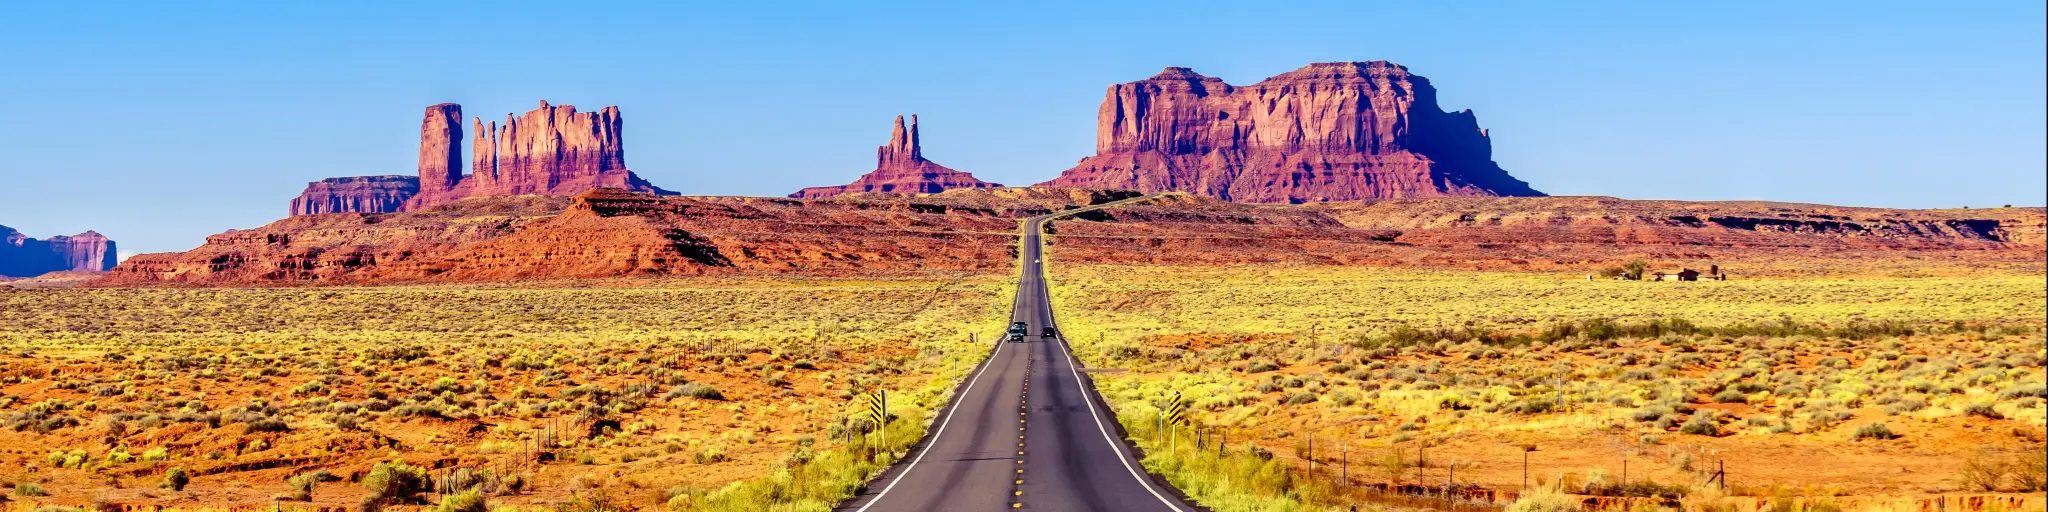 Highway 163 leading to the towering sandstone Buttes and Mesas of the Monument Valley Navajo Tribal Park in Utah-Arizona, United States. 'Forest Gump Point' where he stopped his cross country run